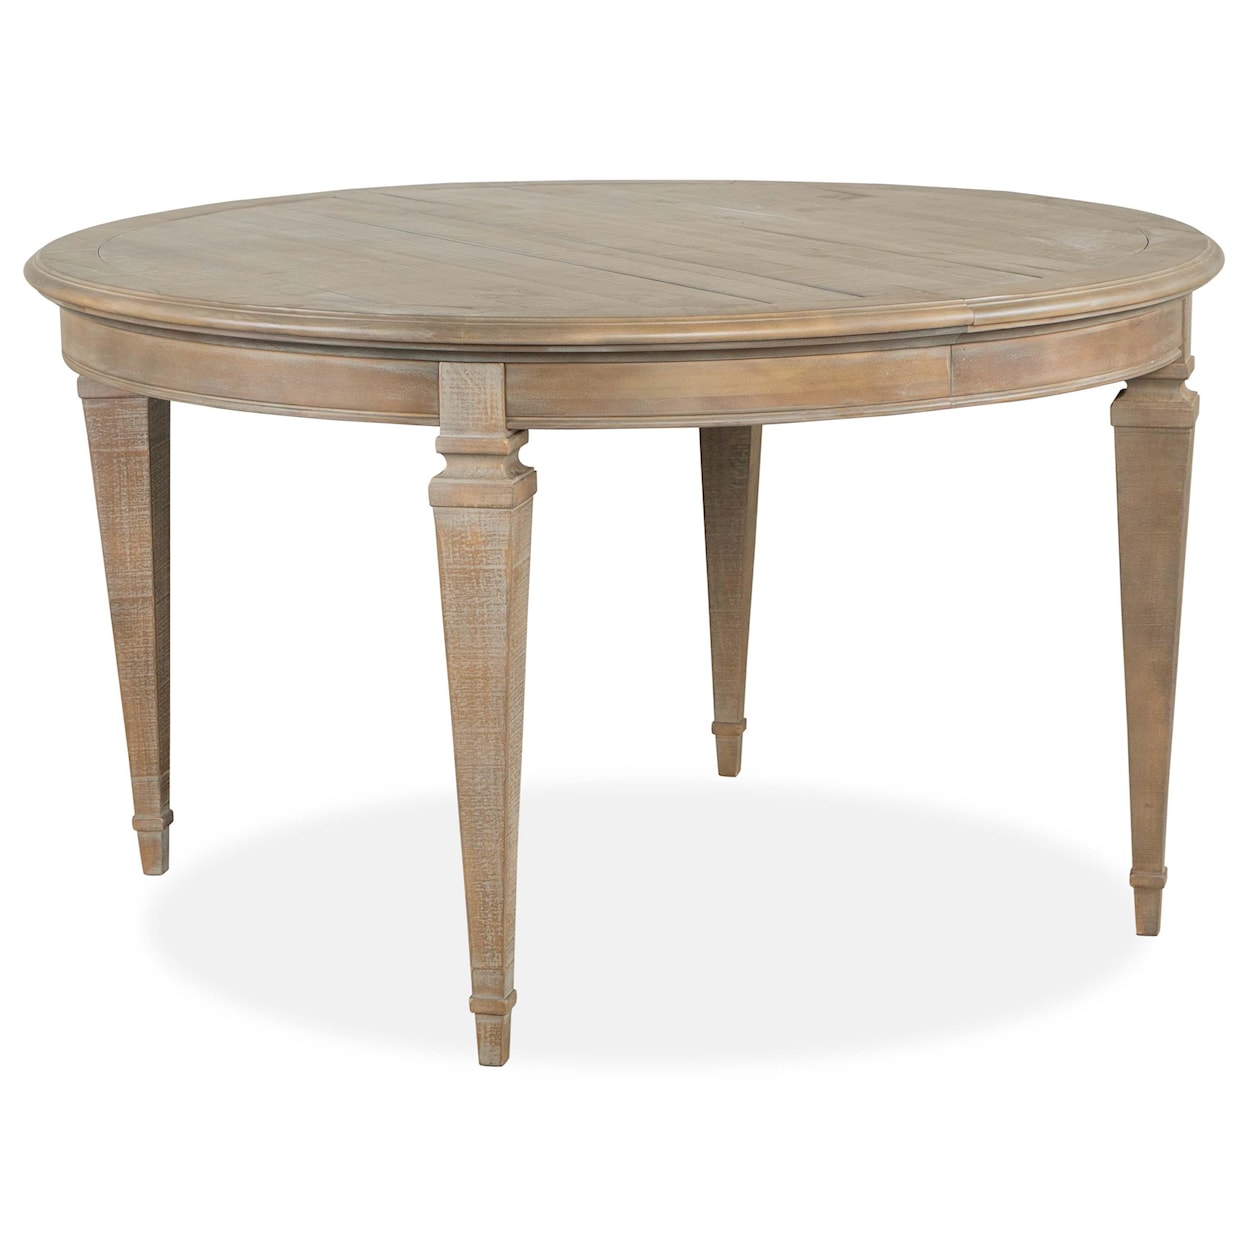 Magnussen Home Lancaster Round Dining Table